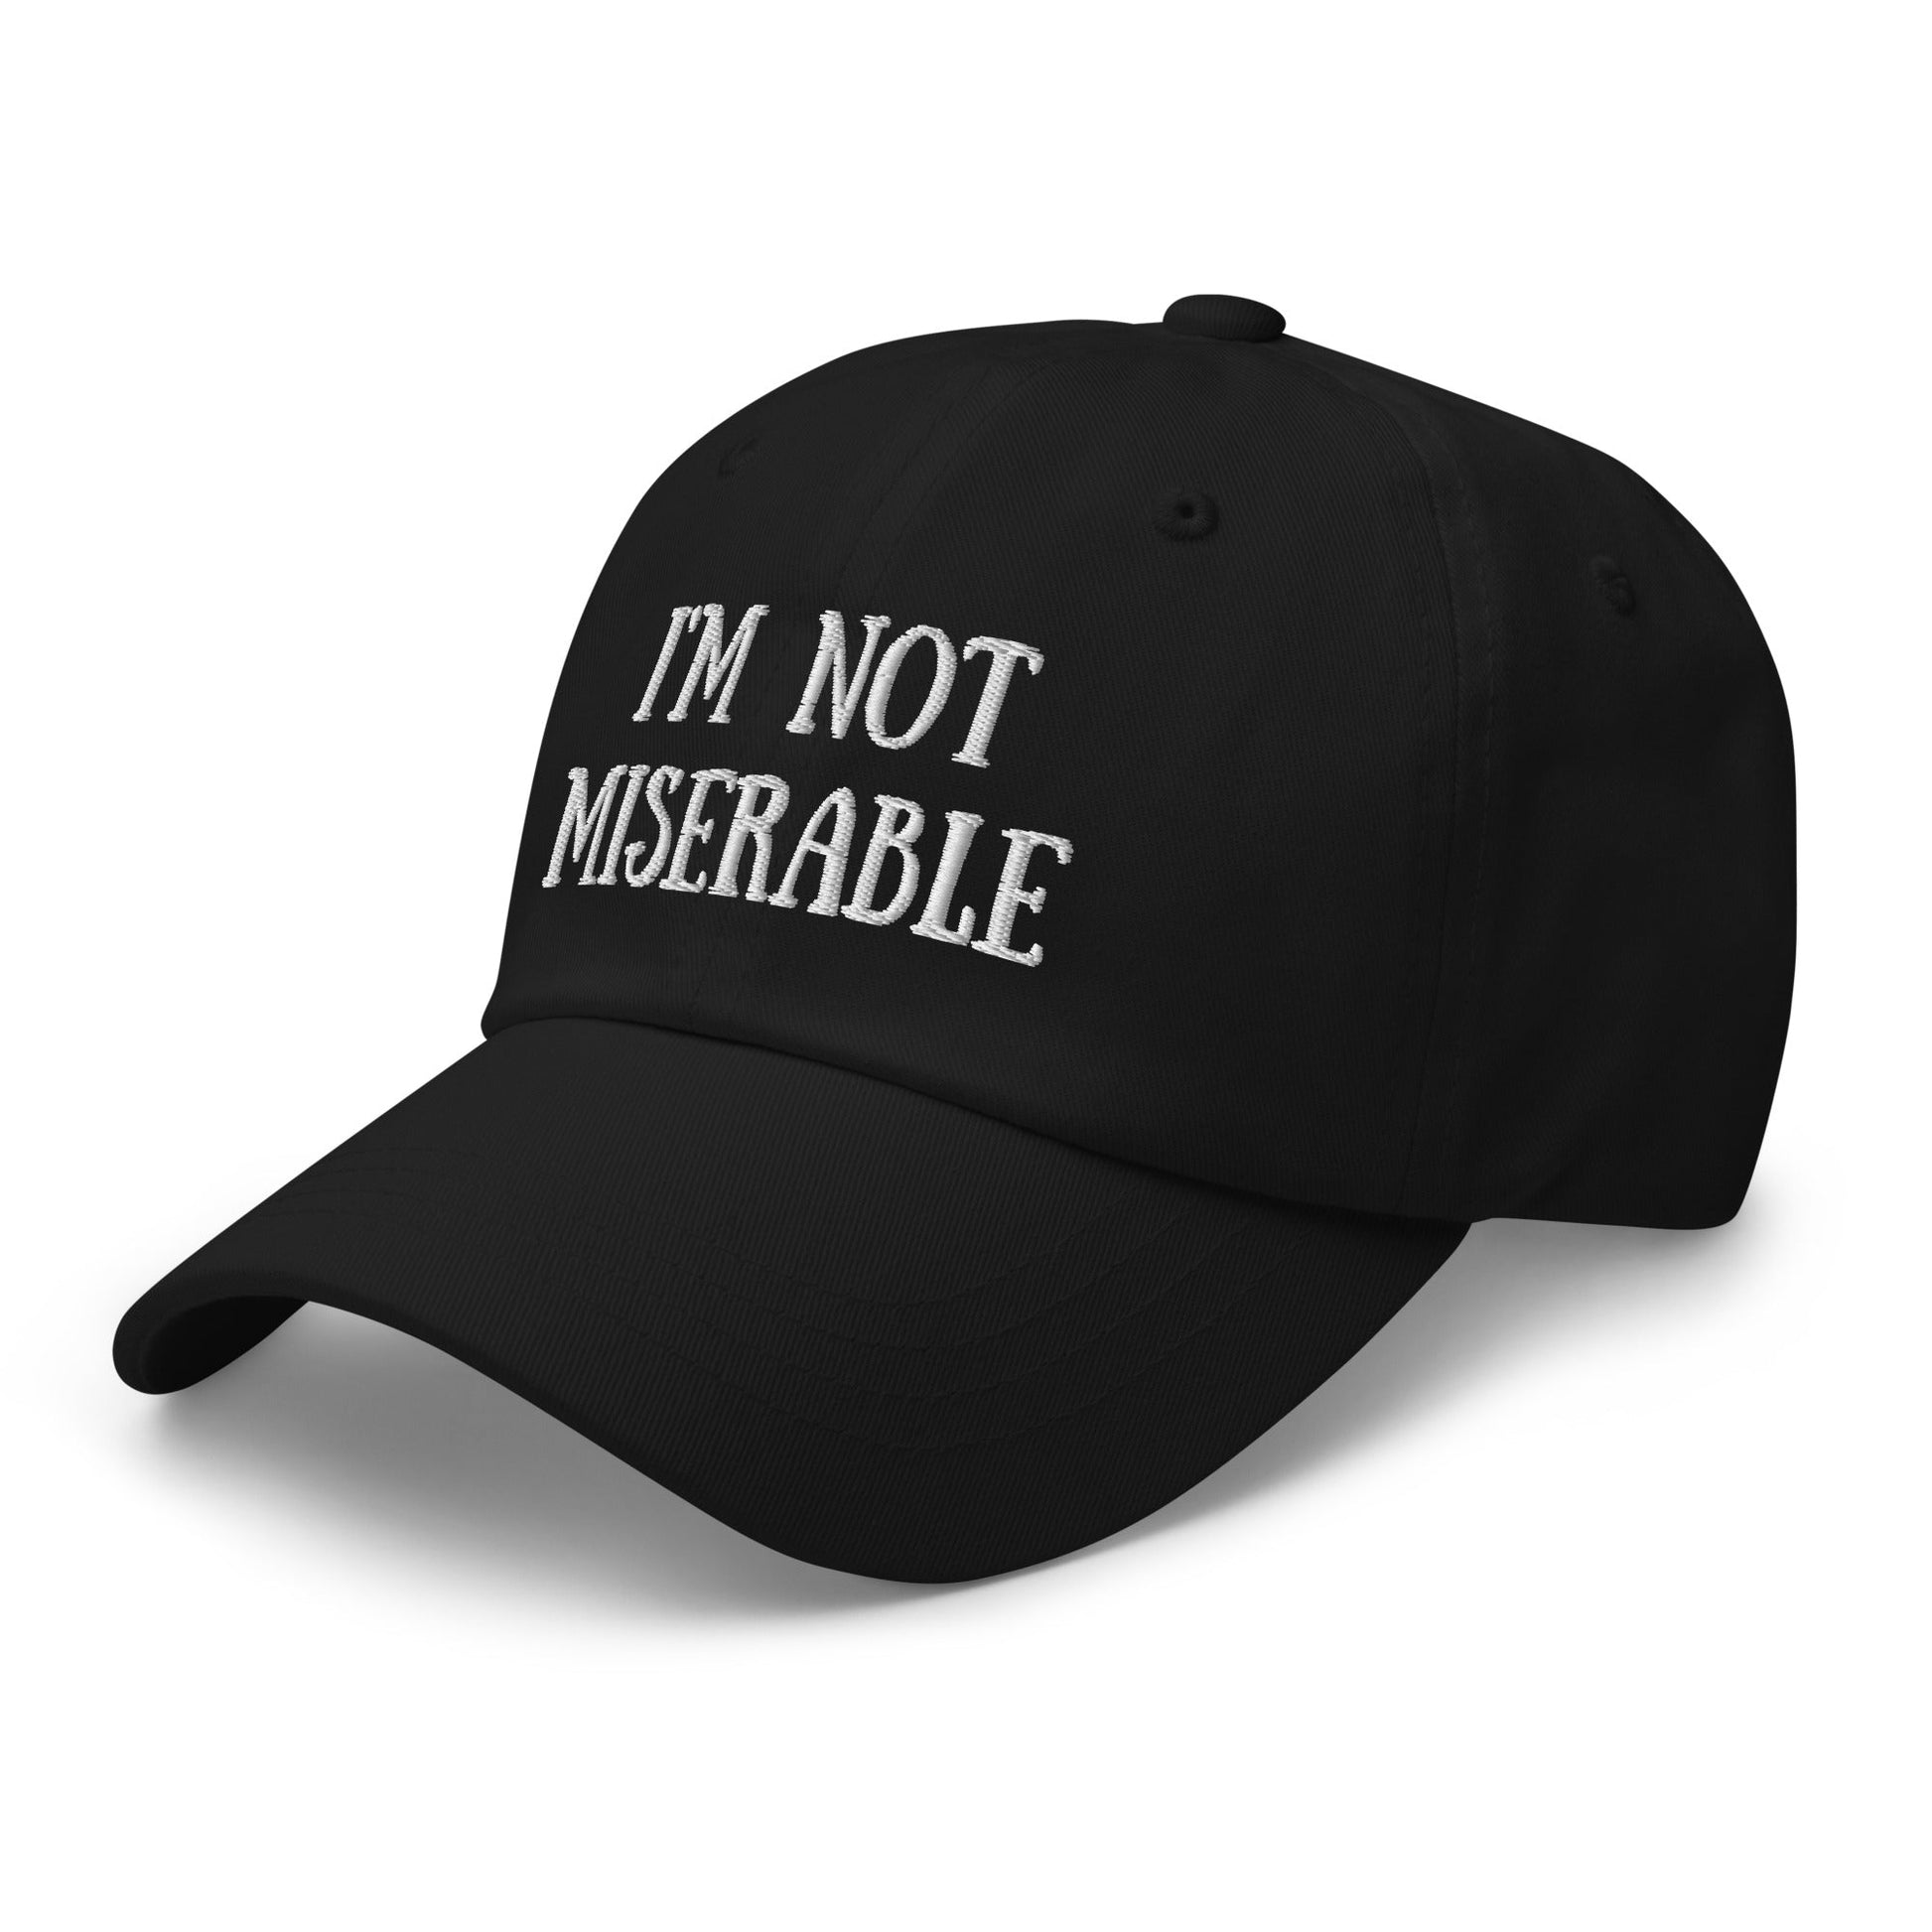 I’m Not Miserable | Dad hat